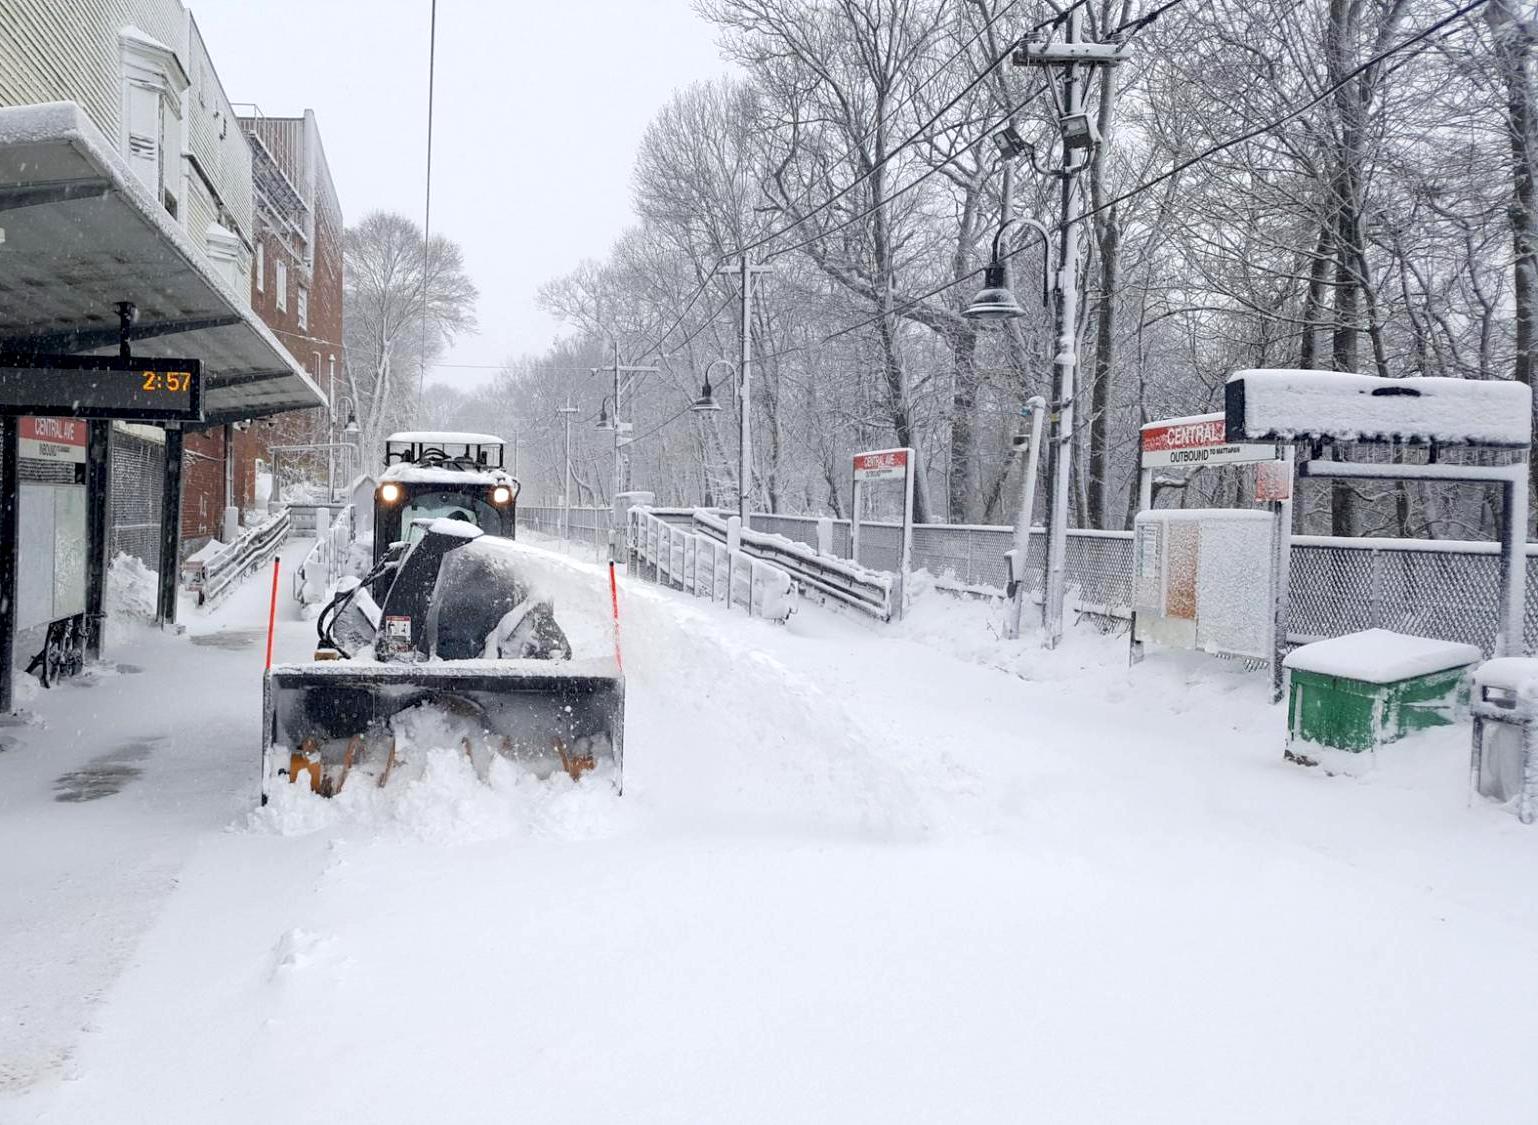 A plow clears snow from the tracks at Central Ave Station on the Mattapan Line